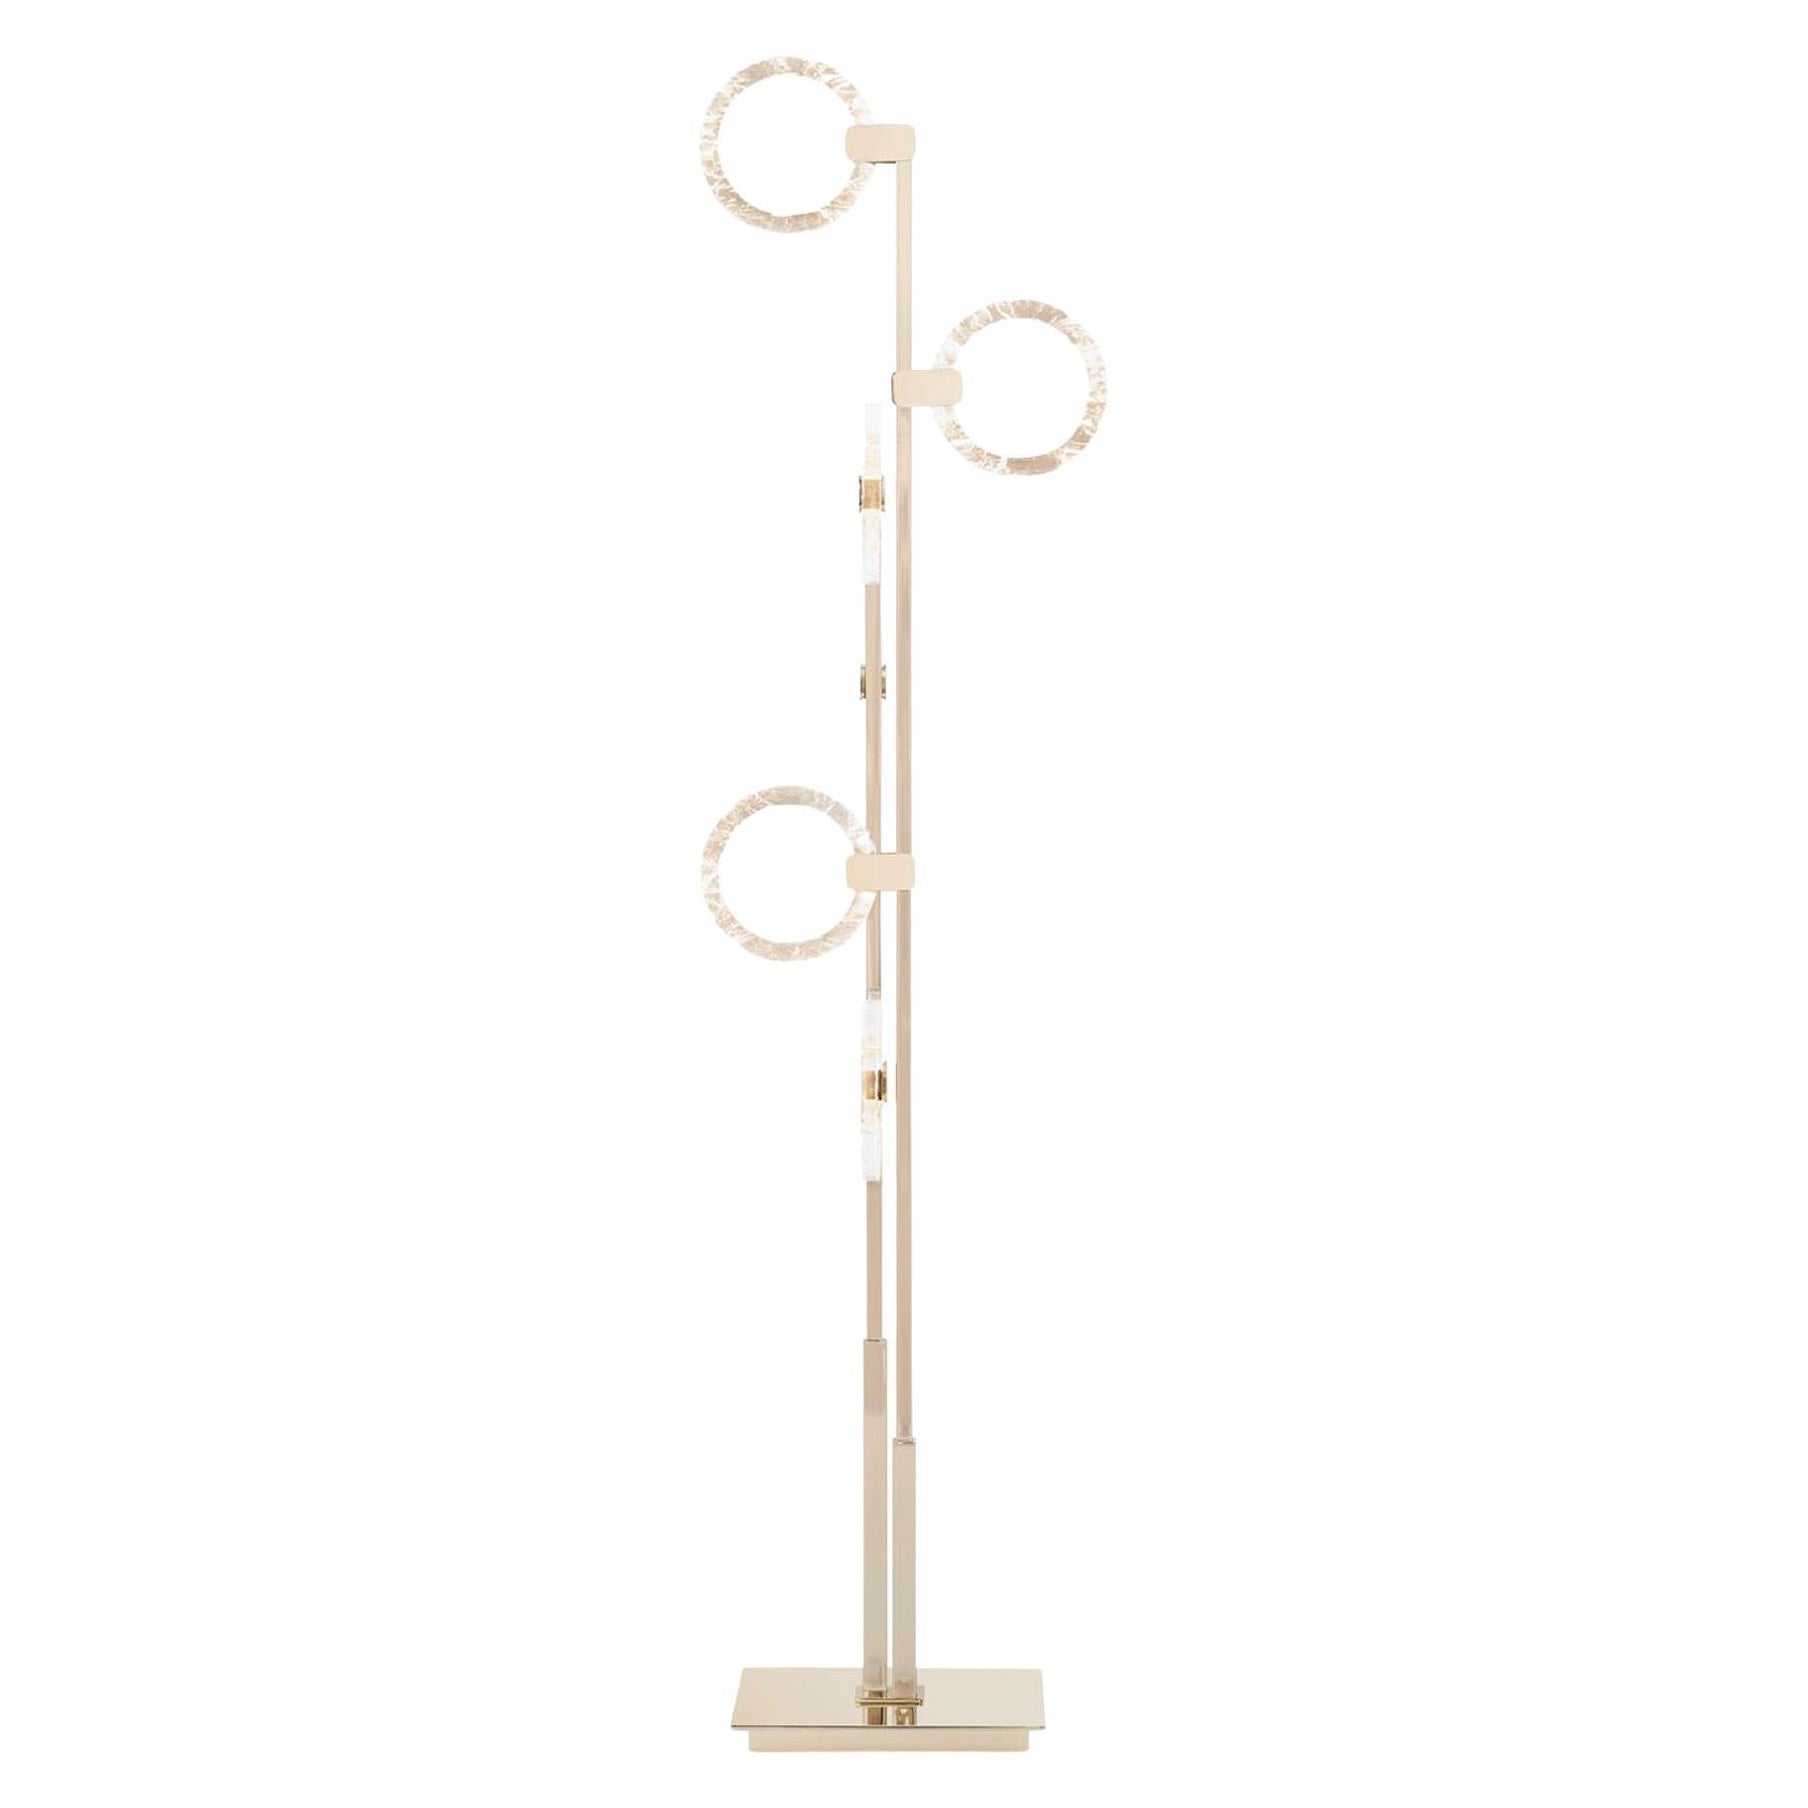 Floor Lamp Metal Structur Polished Champagne Finish Decorative Methacrylate Ring